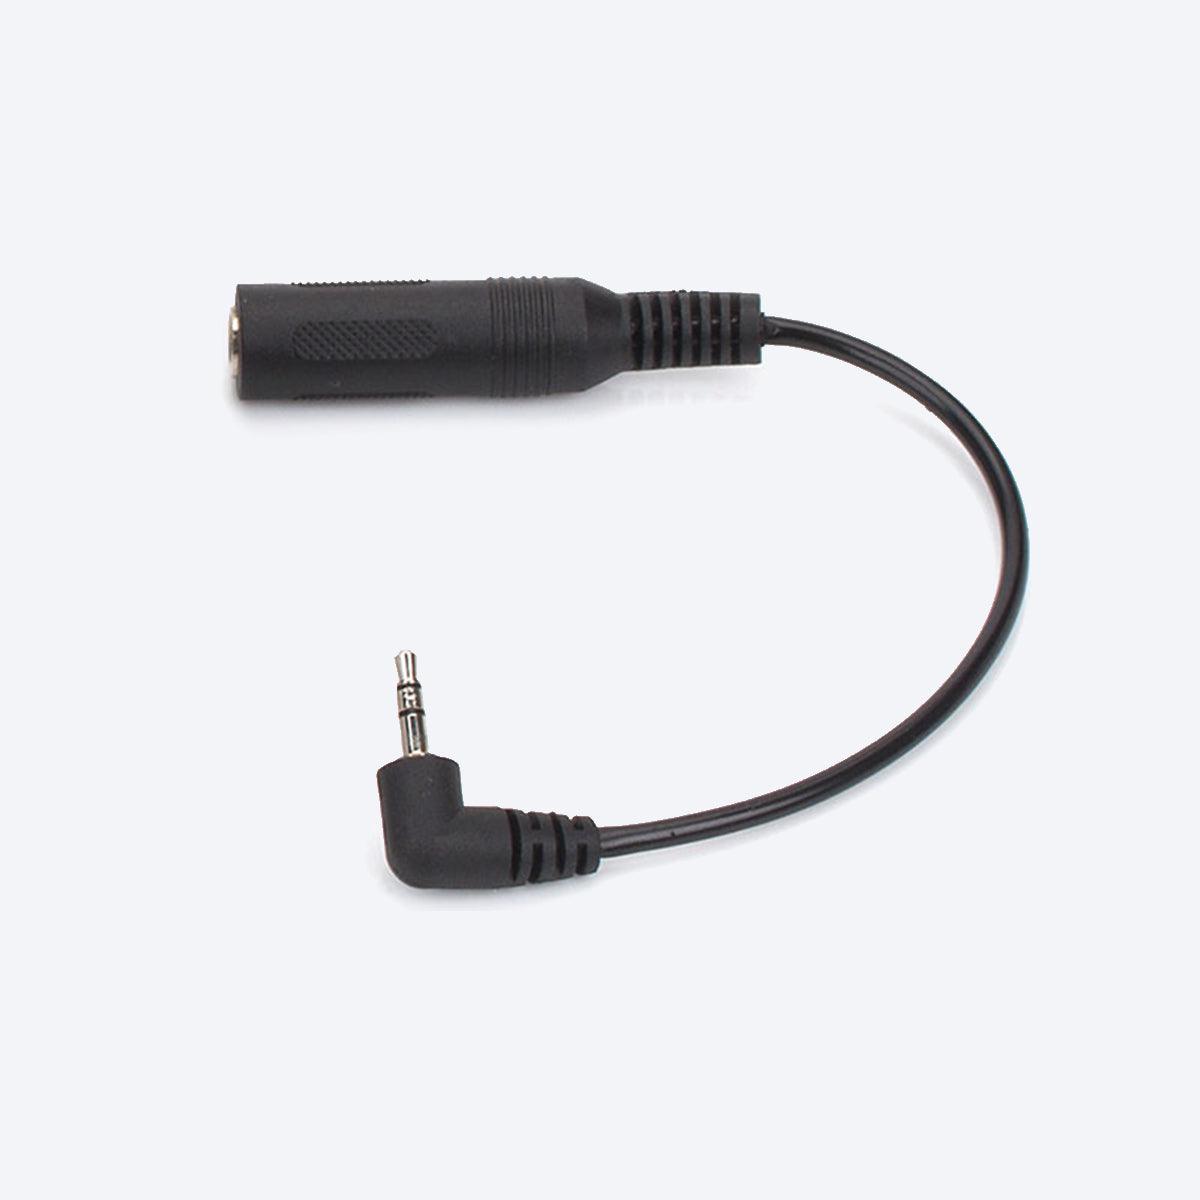 Cable Standard 6.3mm Jack to 3.5mm Adaptor - EZ TATTOO SUPPLY